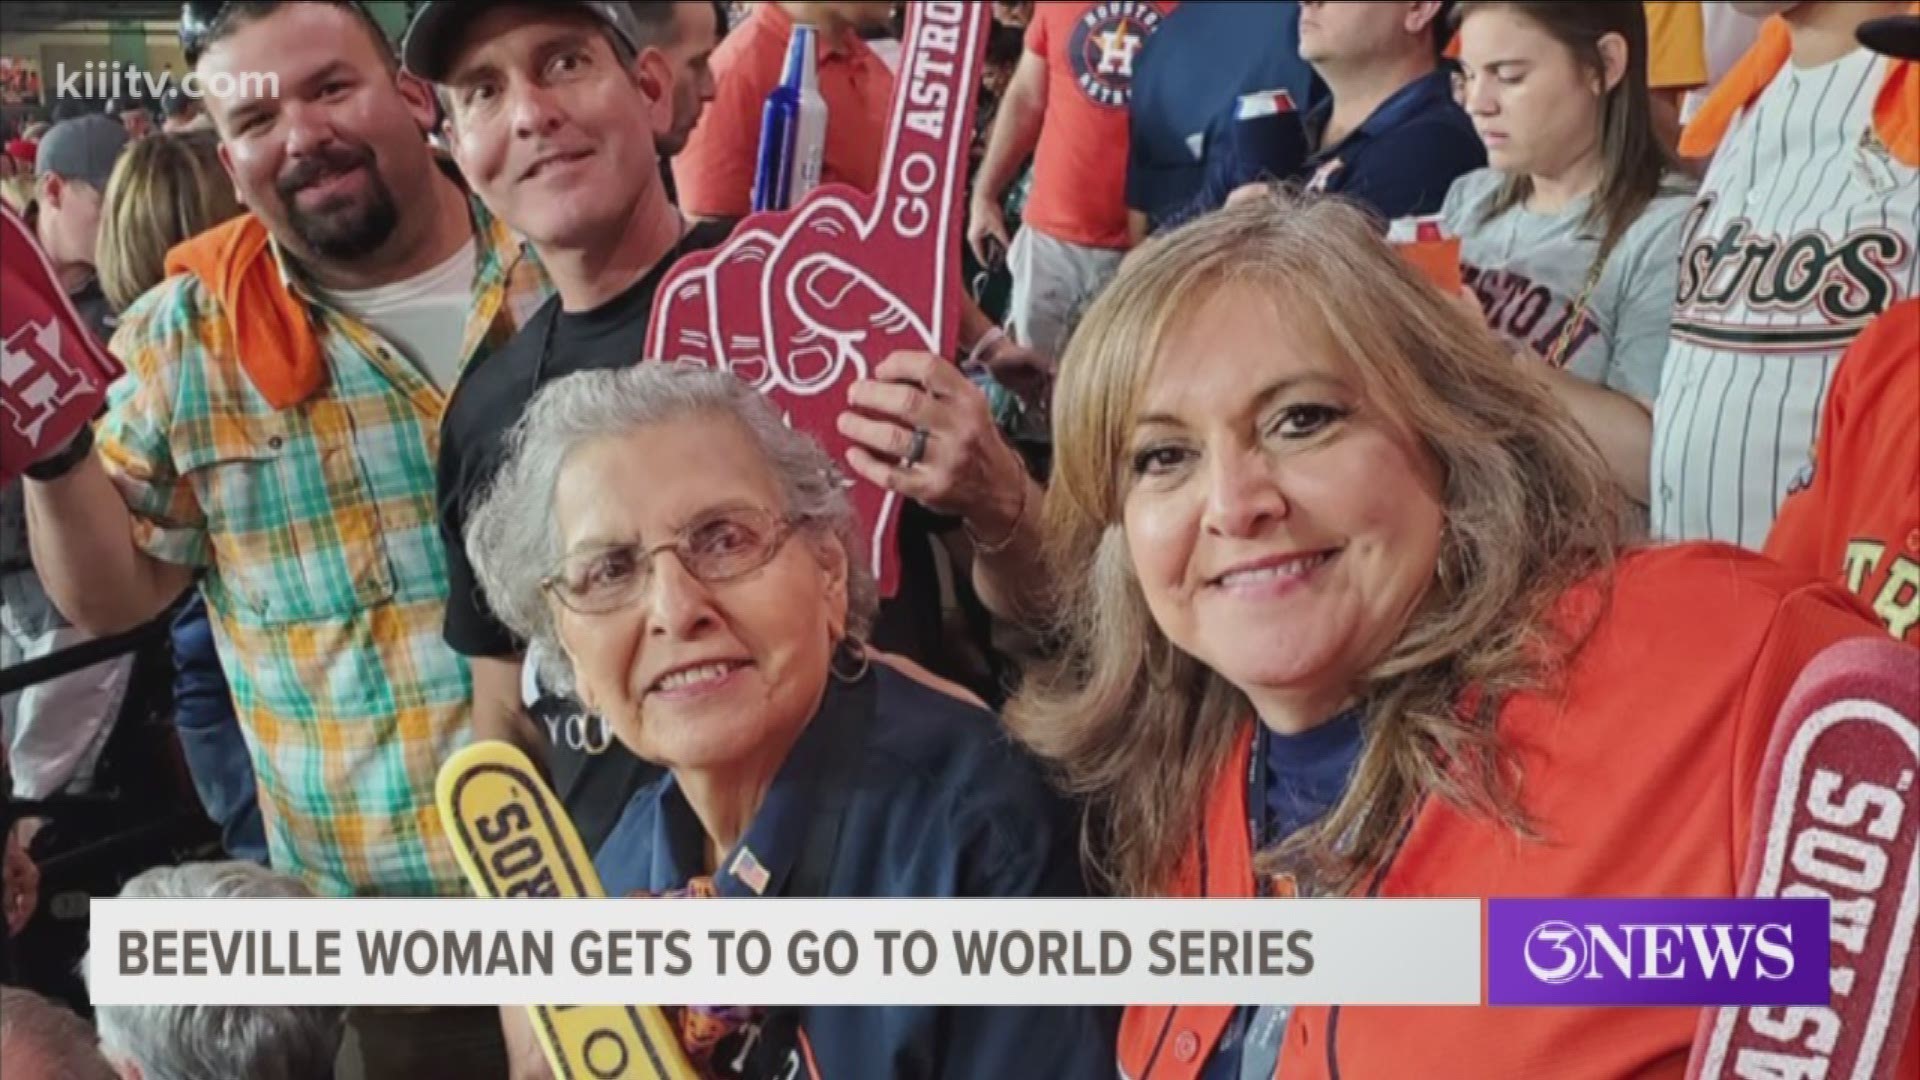 The Houston Astros are back in the World Series for just the third time ever, and many fans from all over are making their way to Houston to be a part of history.